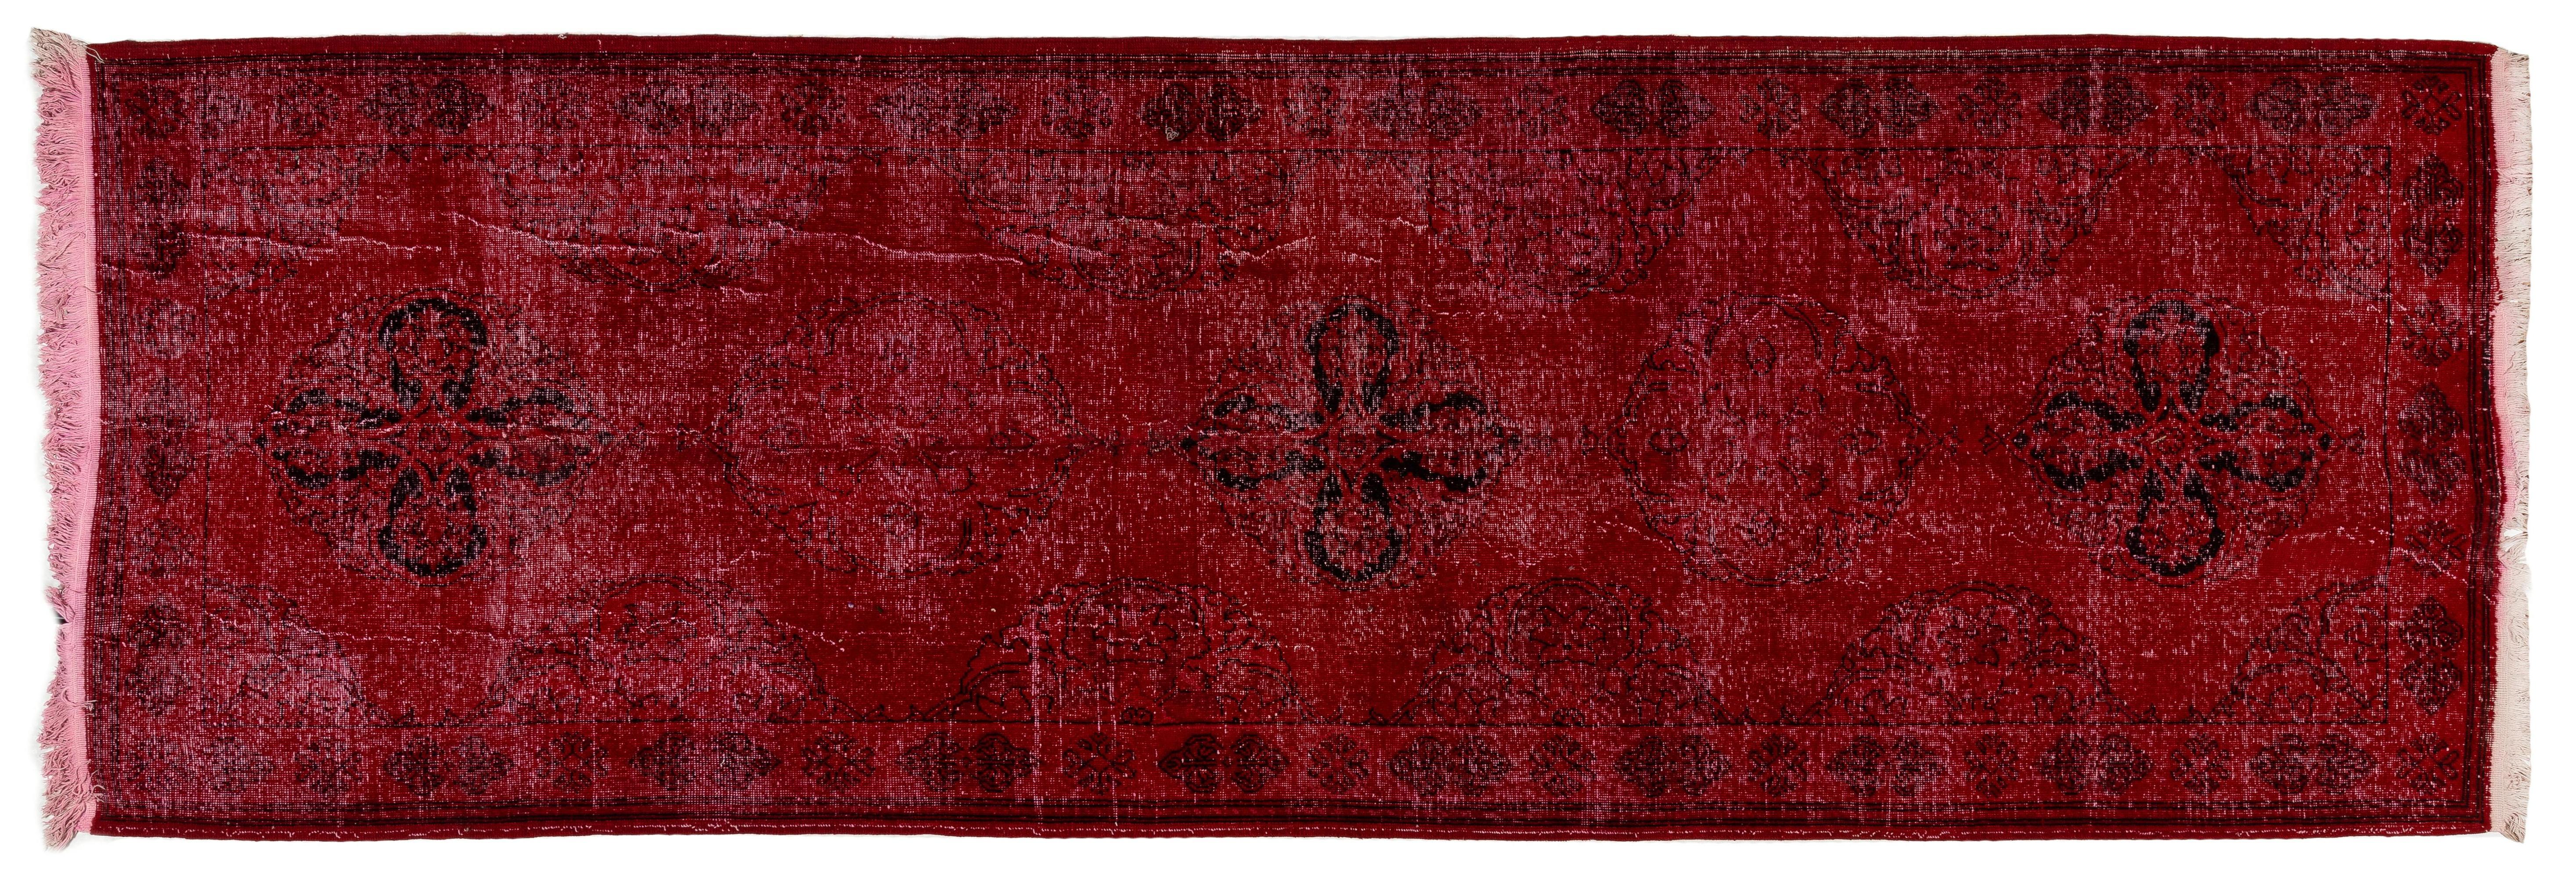 20th Century 4.6x13.4 Ft Handmade Vintage Turkish Wool Runner Rug in Red for Hallway Decor For Sale